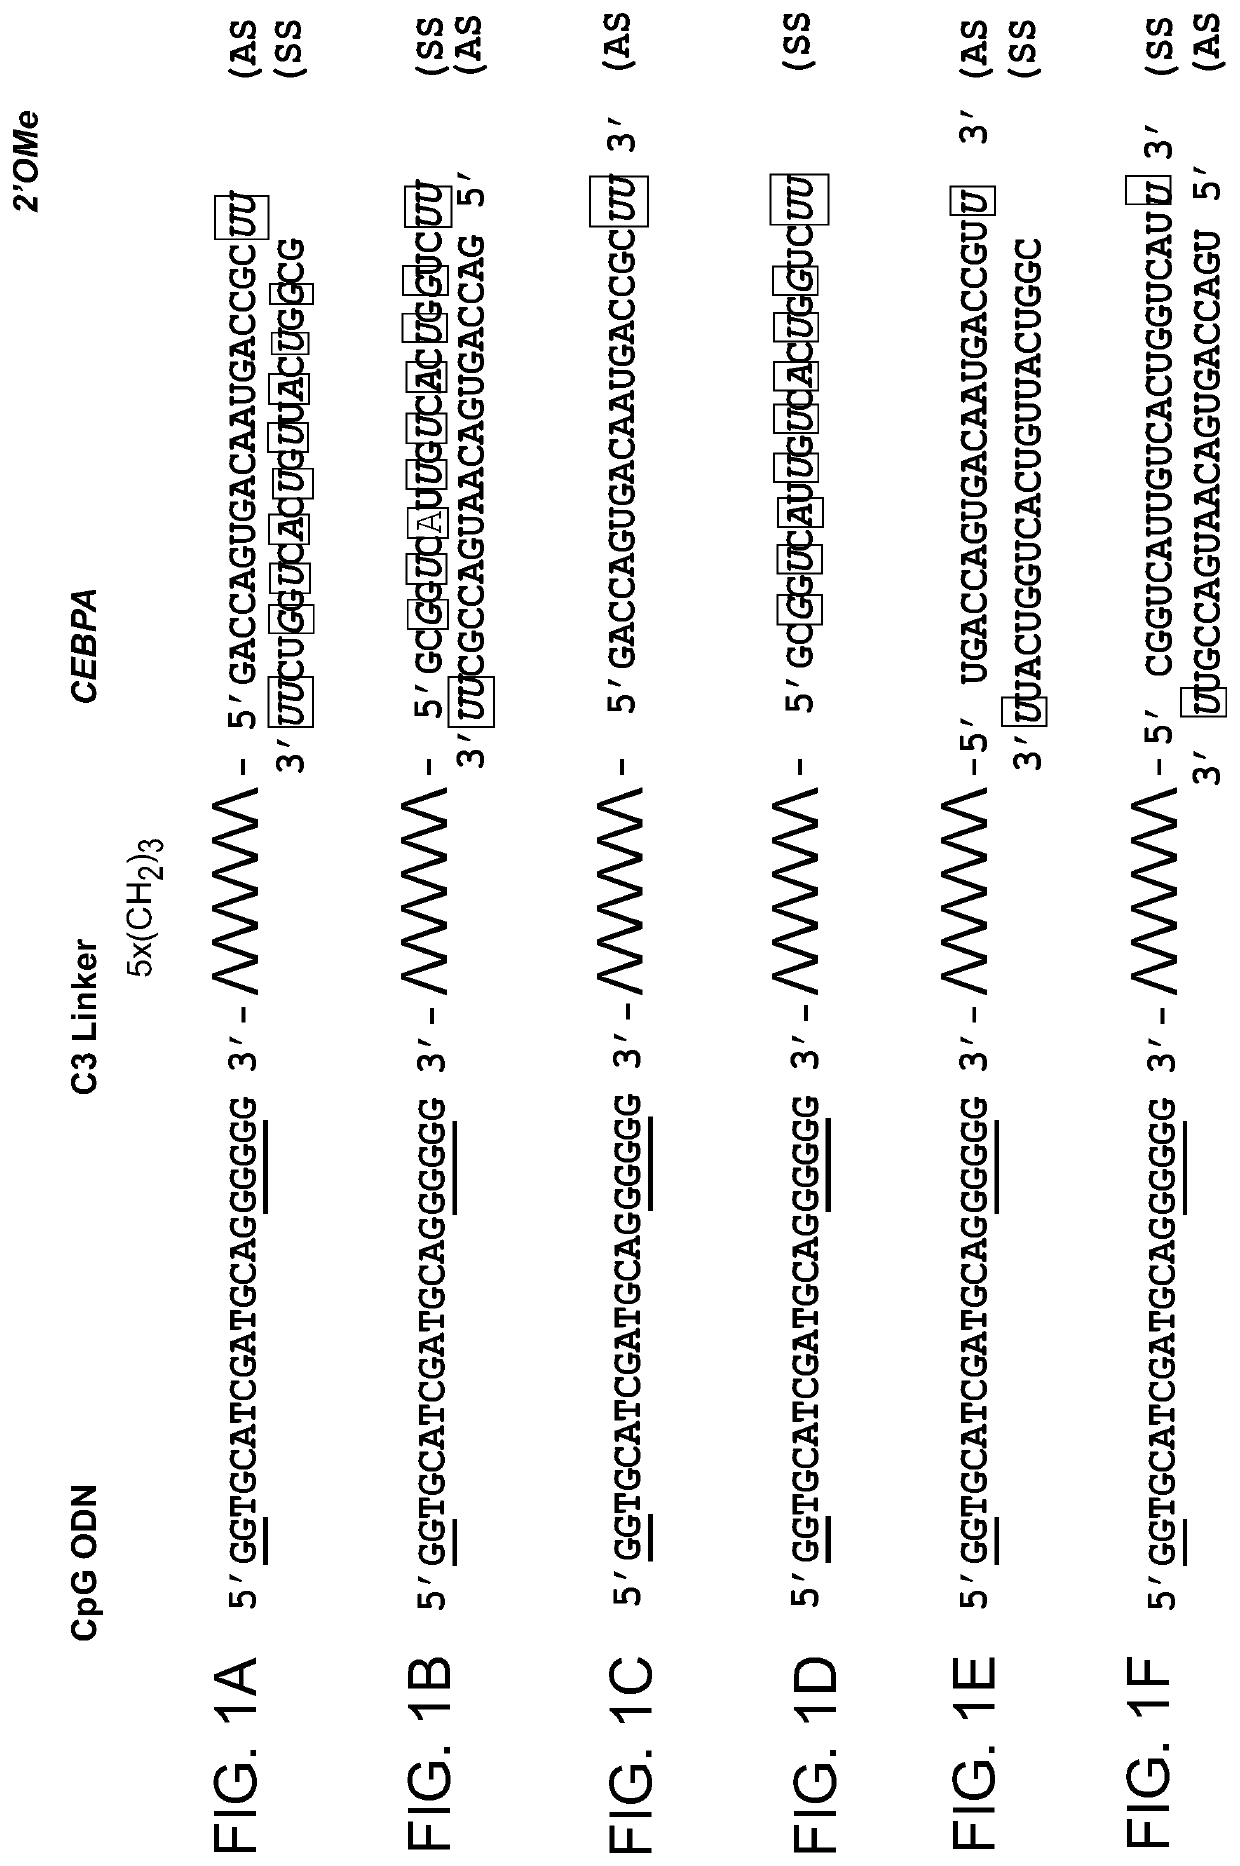 Compounds and compositions including phosphorothioated oligodeoxynucleotide, and methods of use thereof